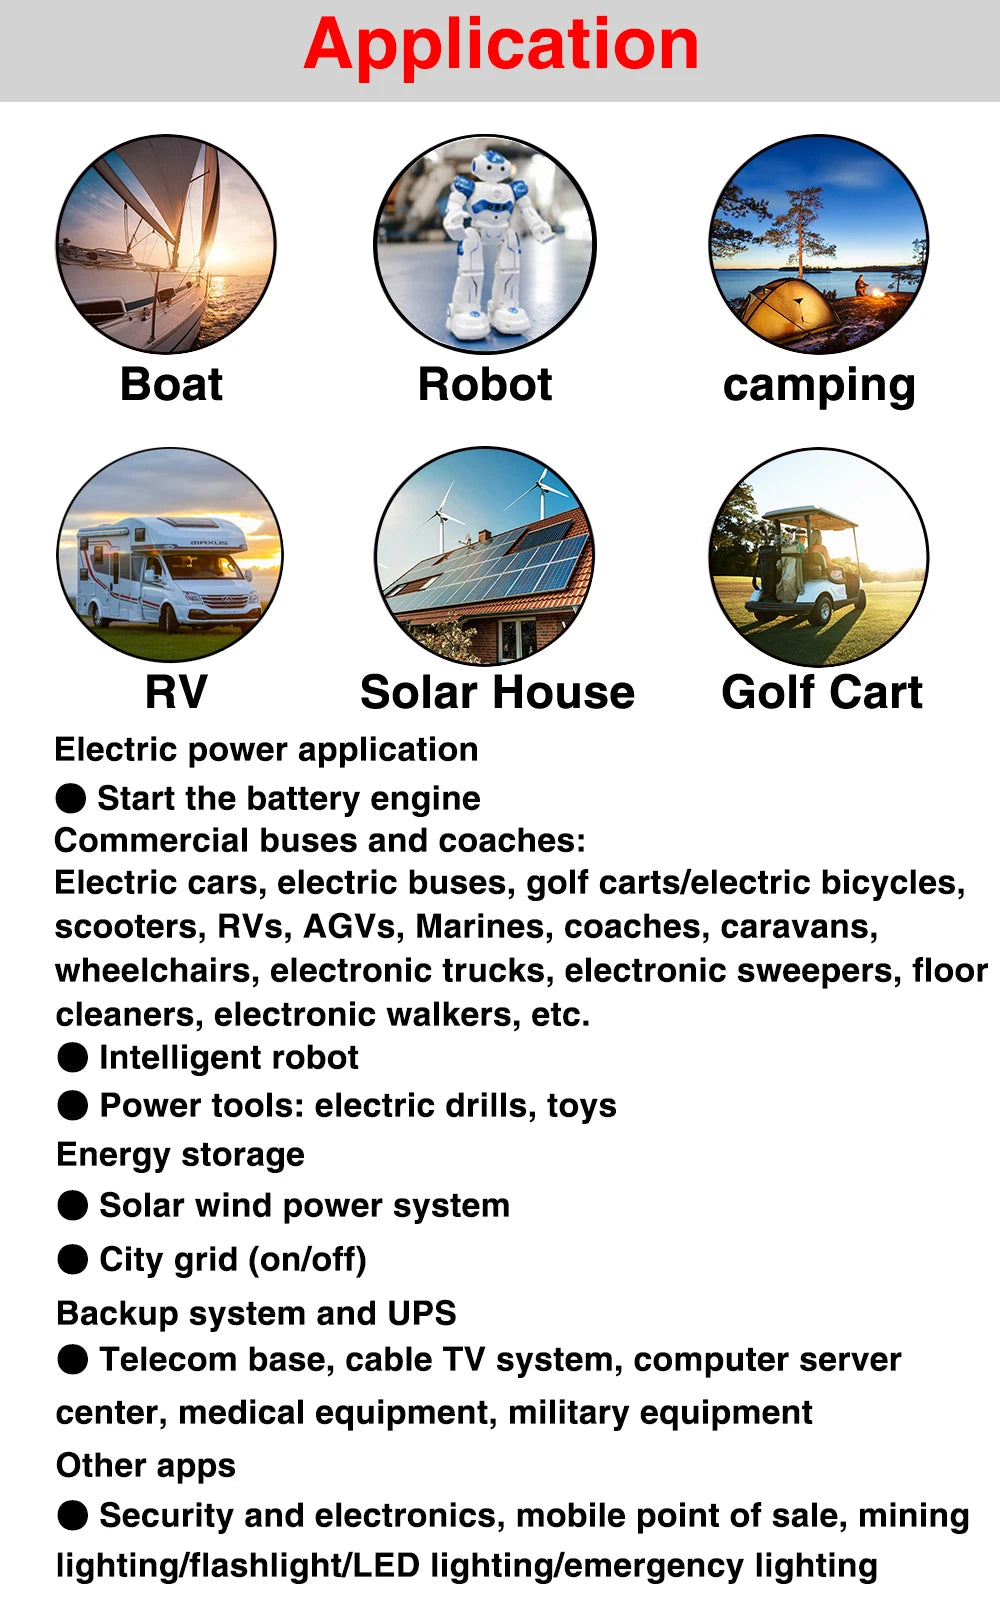 Suitable for various applications: camping, RVs, electric vehicles, solar storage, and more.